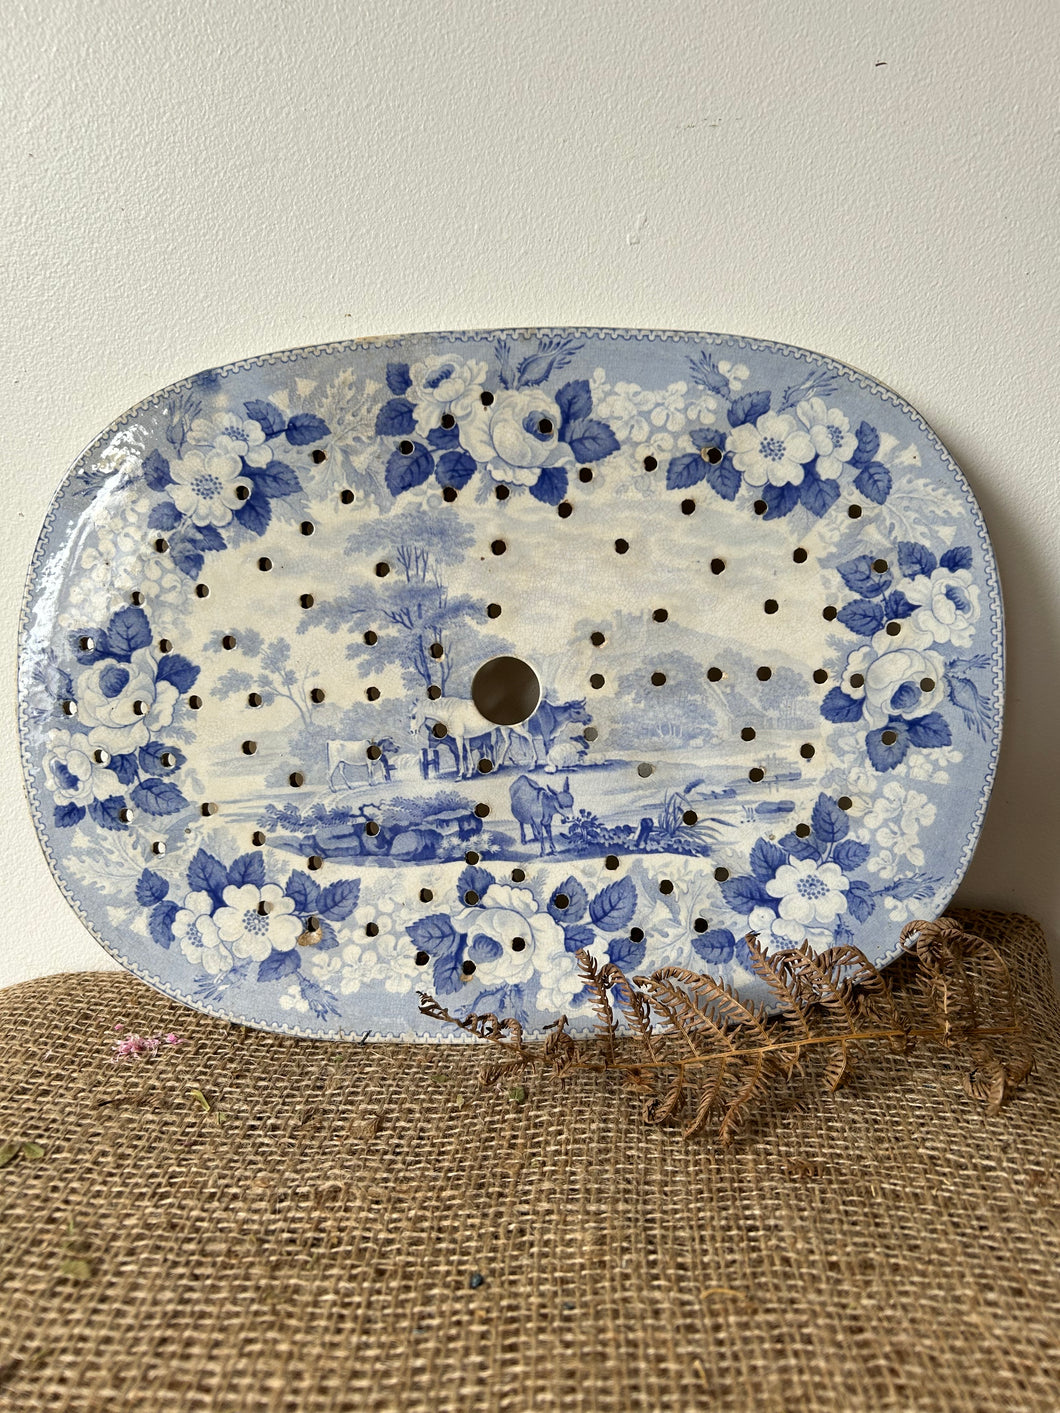 Fabulous Blue and White Ironstone Drainer